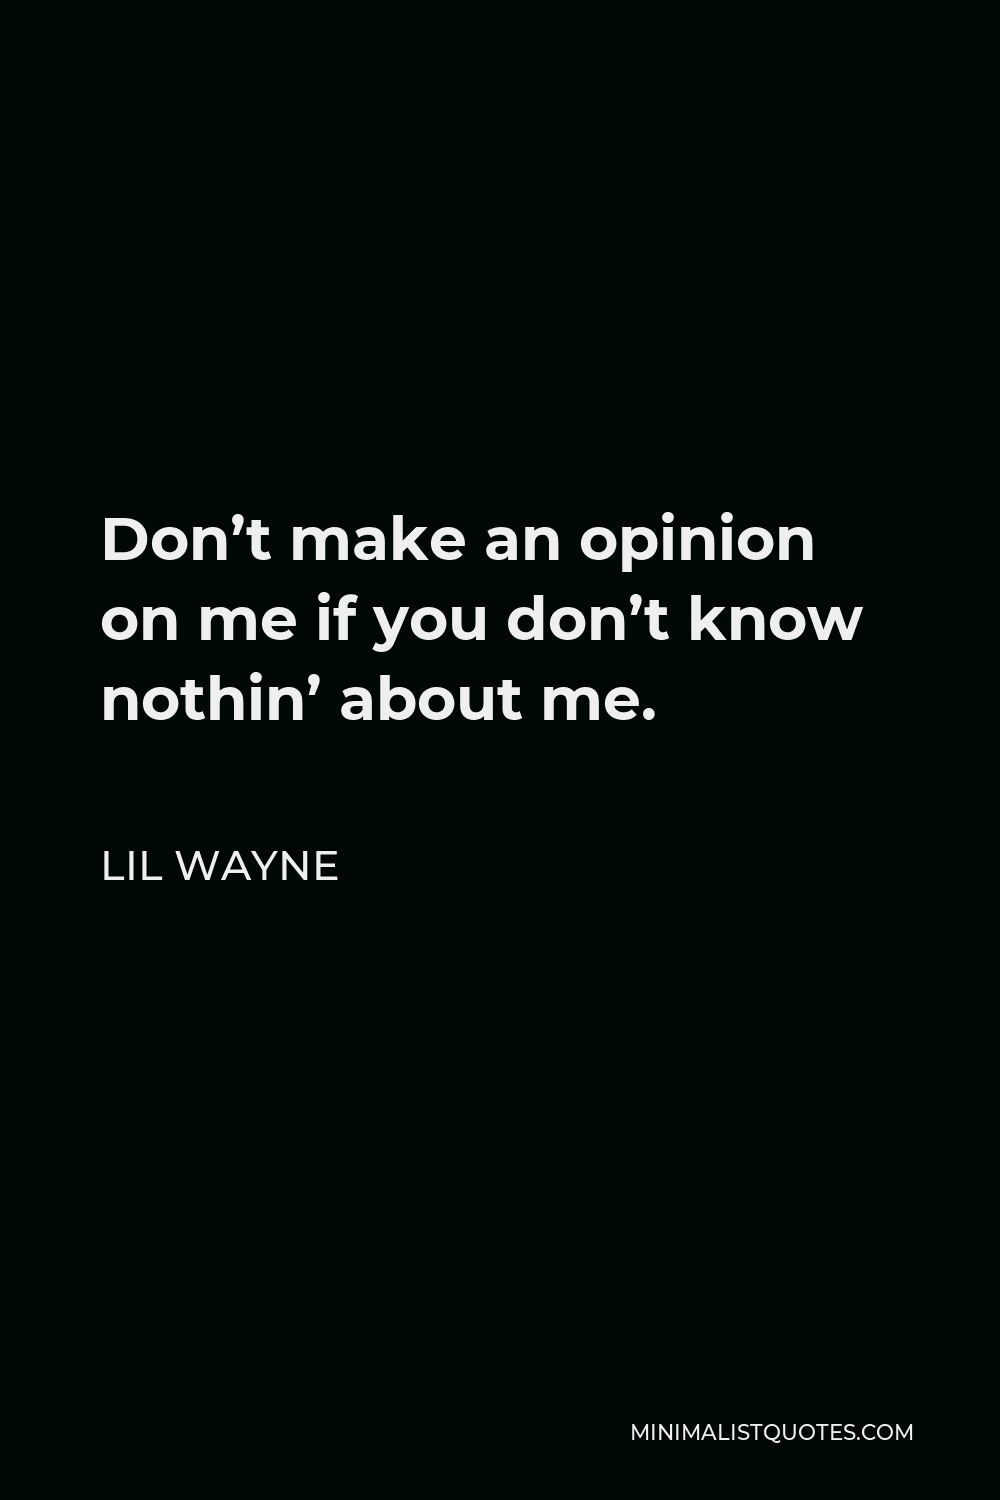 Lil Wayne Quote - Don’t make an opinion on me if you don’t know nothin’ about me.